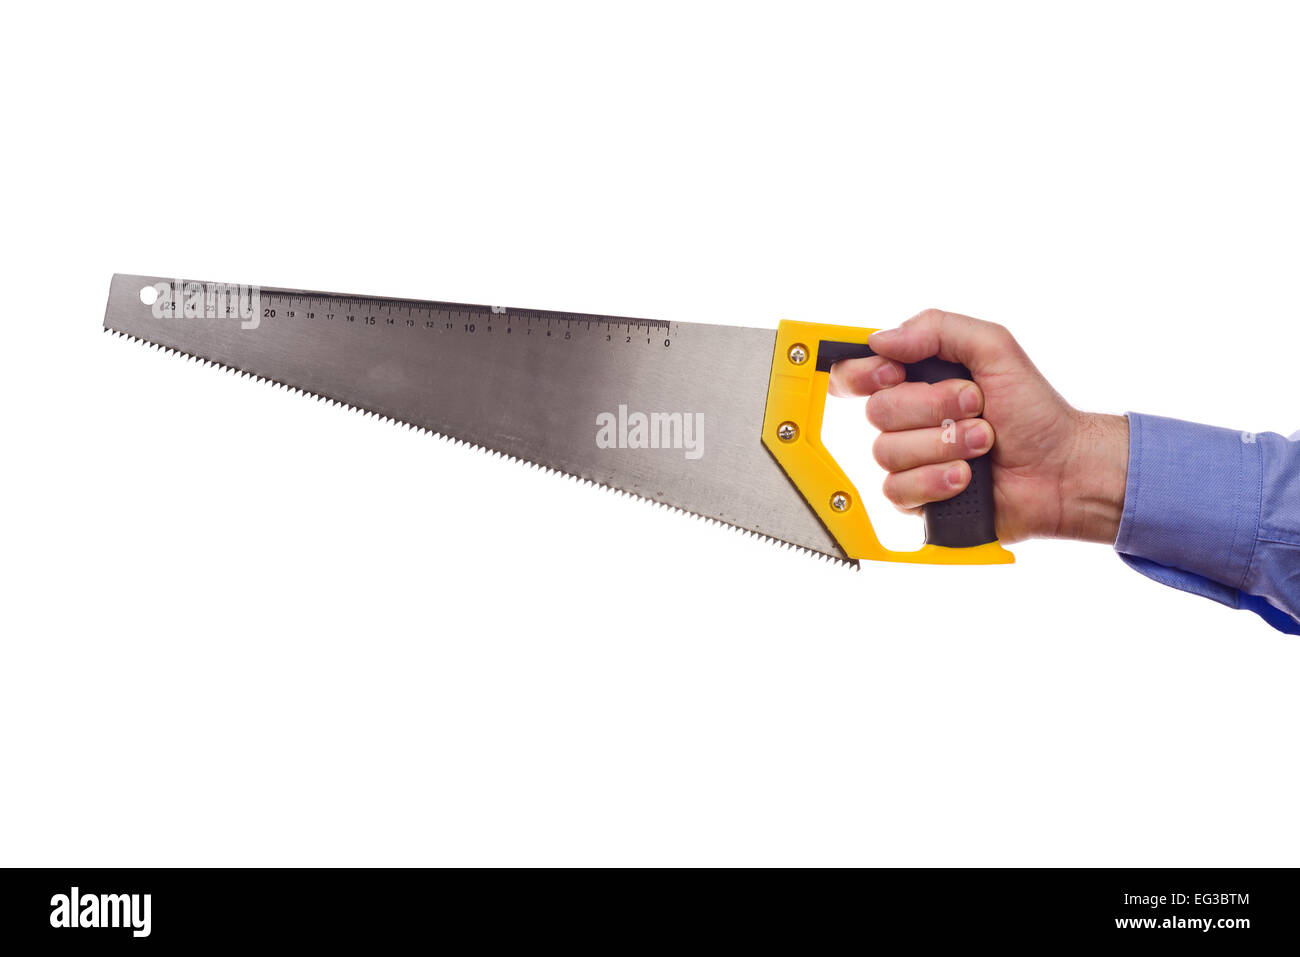 Male worker's hand holding crosscut handsaw. Part of series set of images with DIY tools for home jobs and crafts in hand isolat Stock Photo